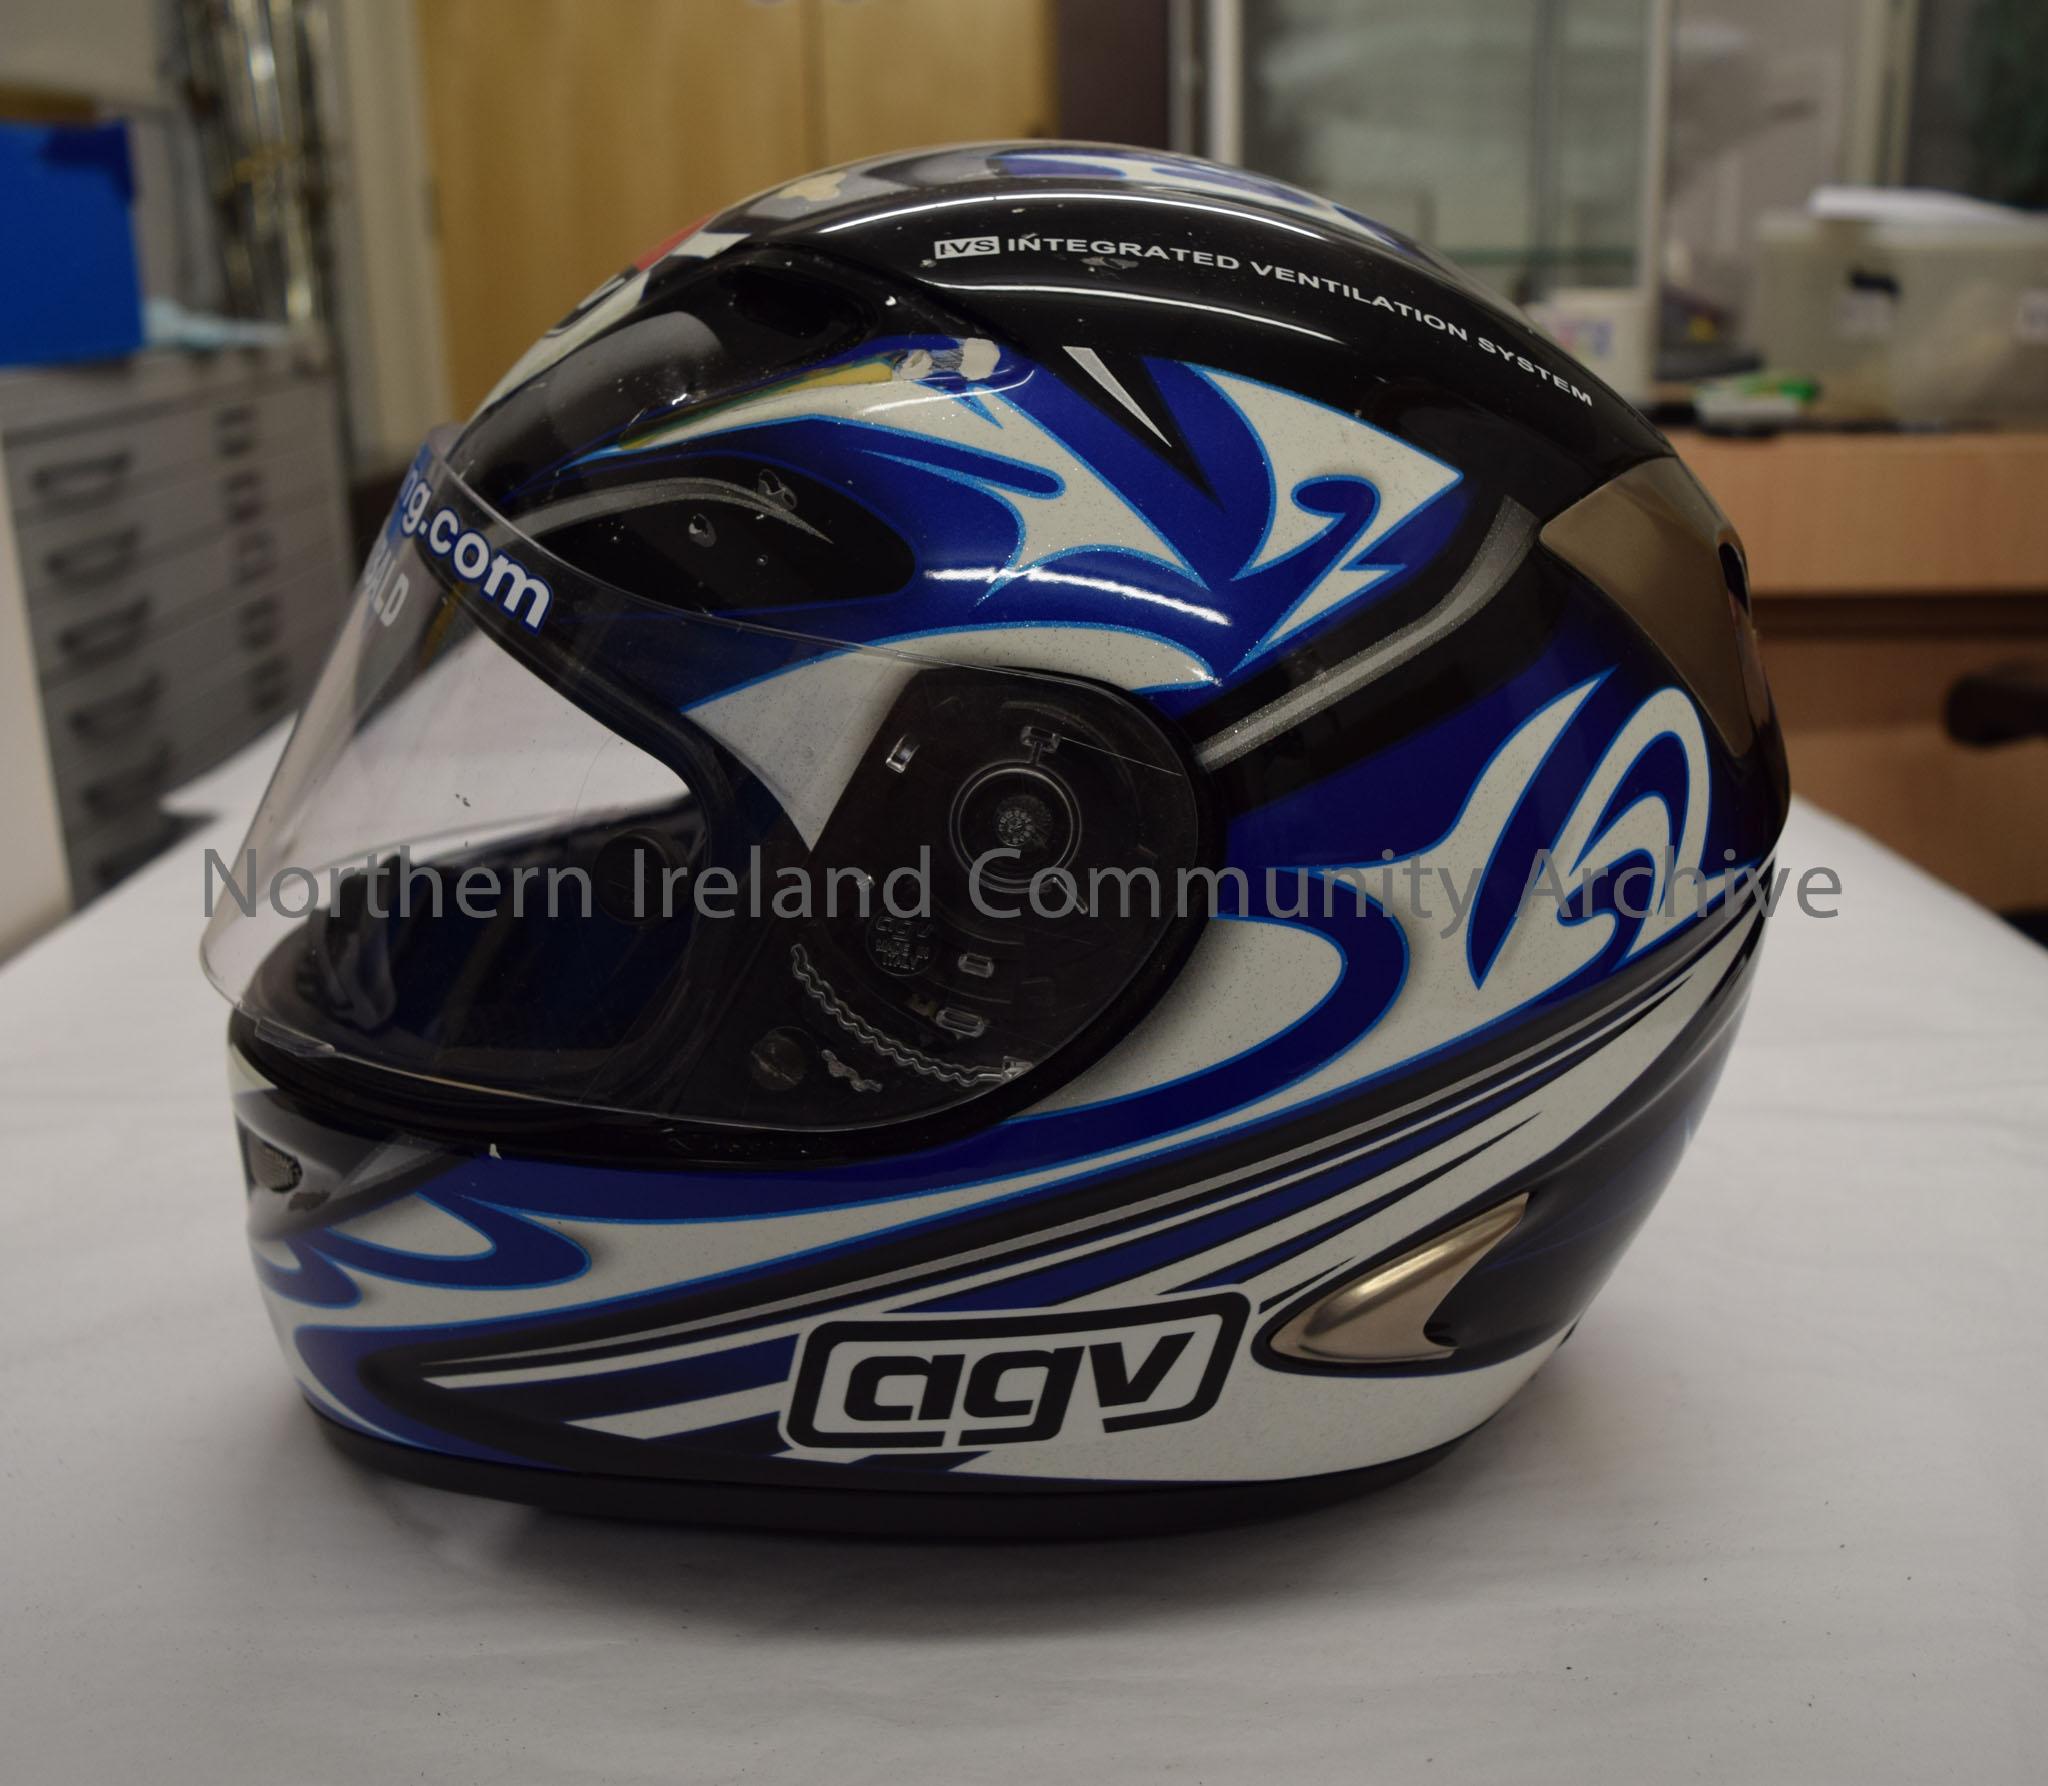 AGV motorcycle helmet belonging to Adrian Archibald. Black helmet with blue, white and silver tribal style pattern on it. Two vents on the chin strap. – 2016.39 (3)